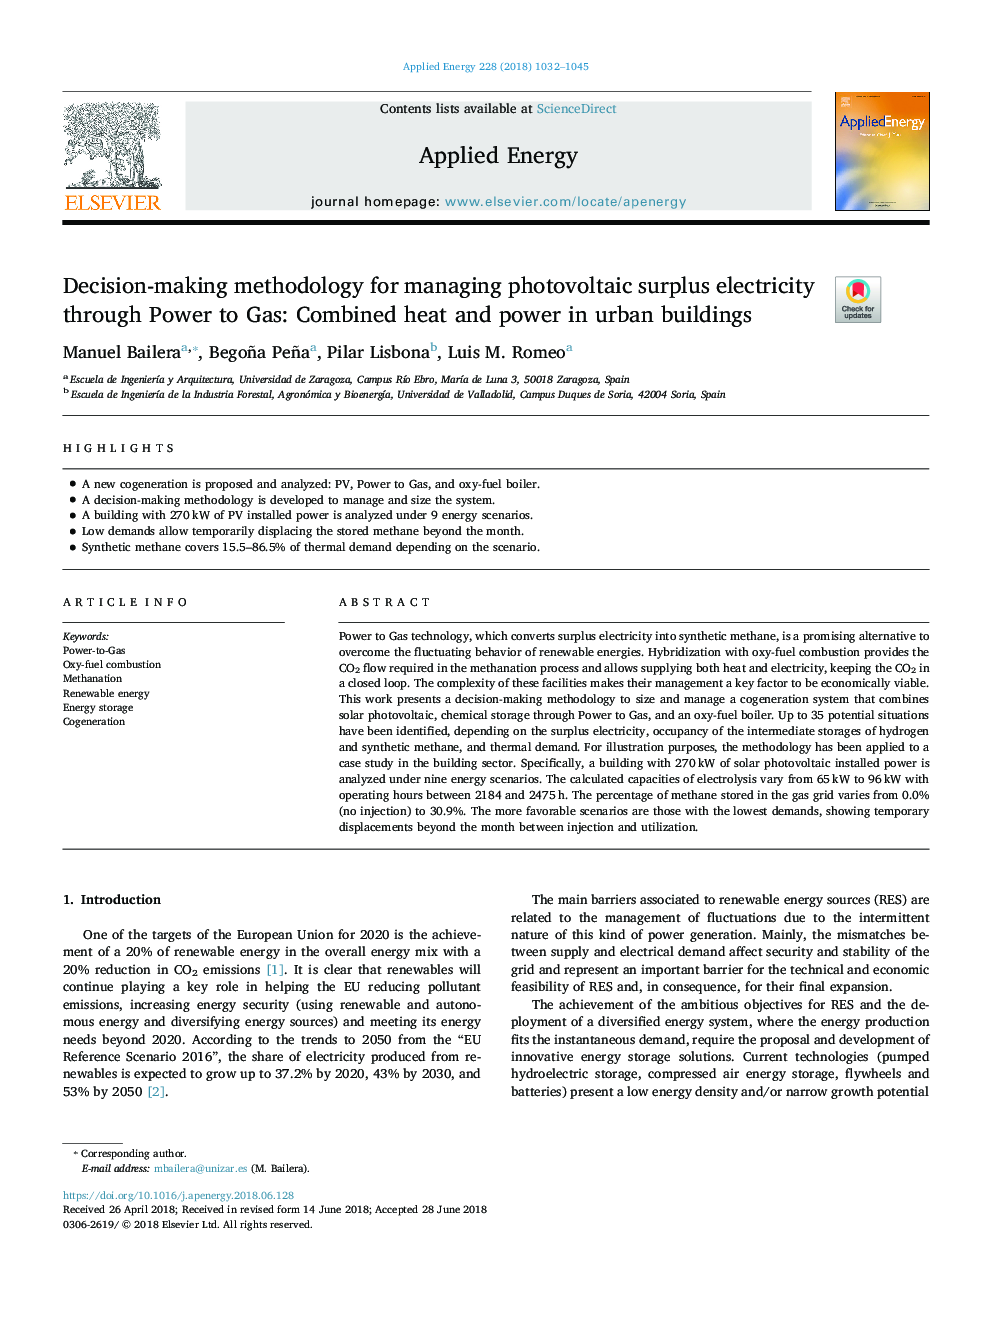 Decision-making methodology for managing photovoltaic surplus electricity through Power to Gas: Combined heat and power in urban buildings